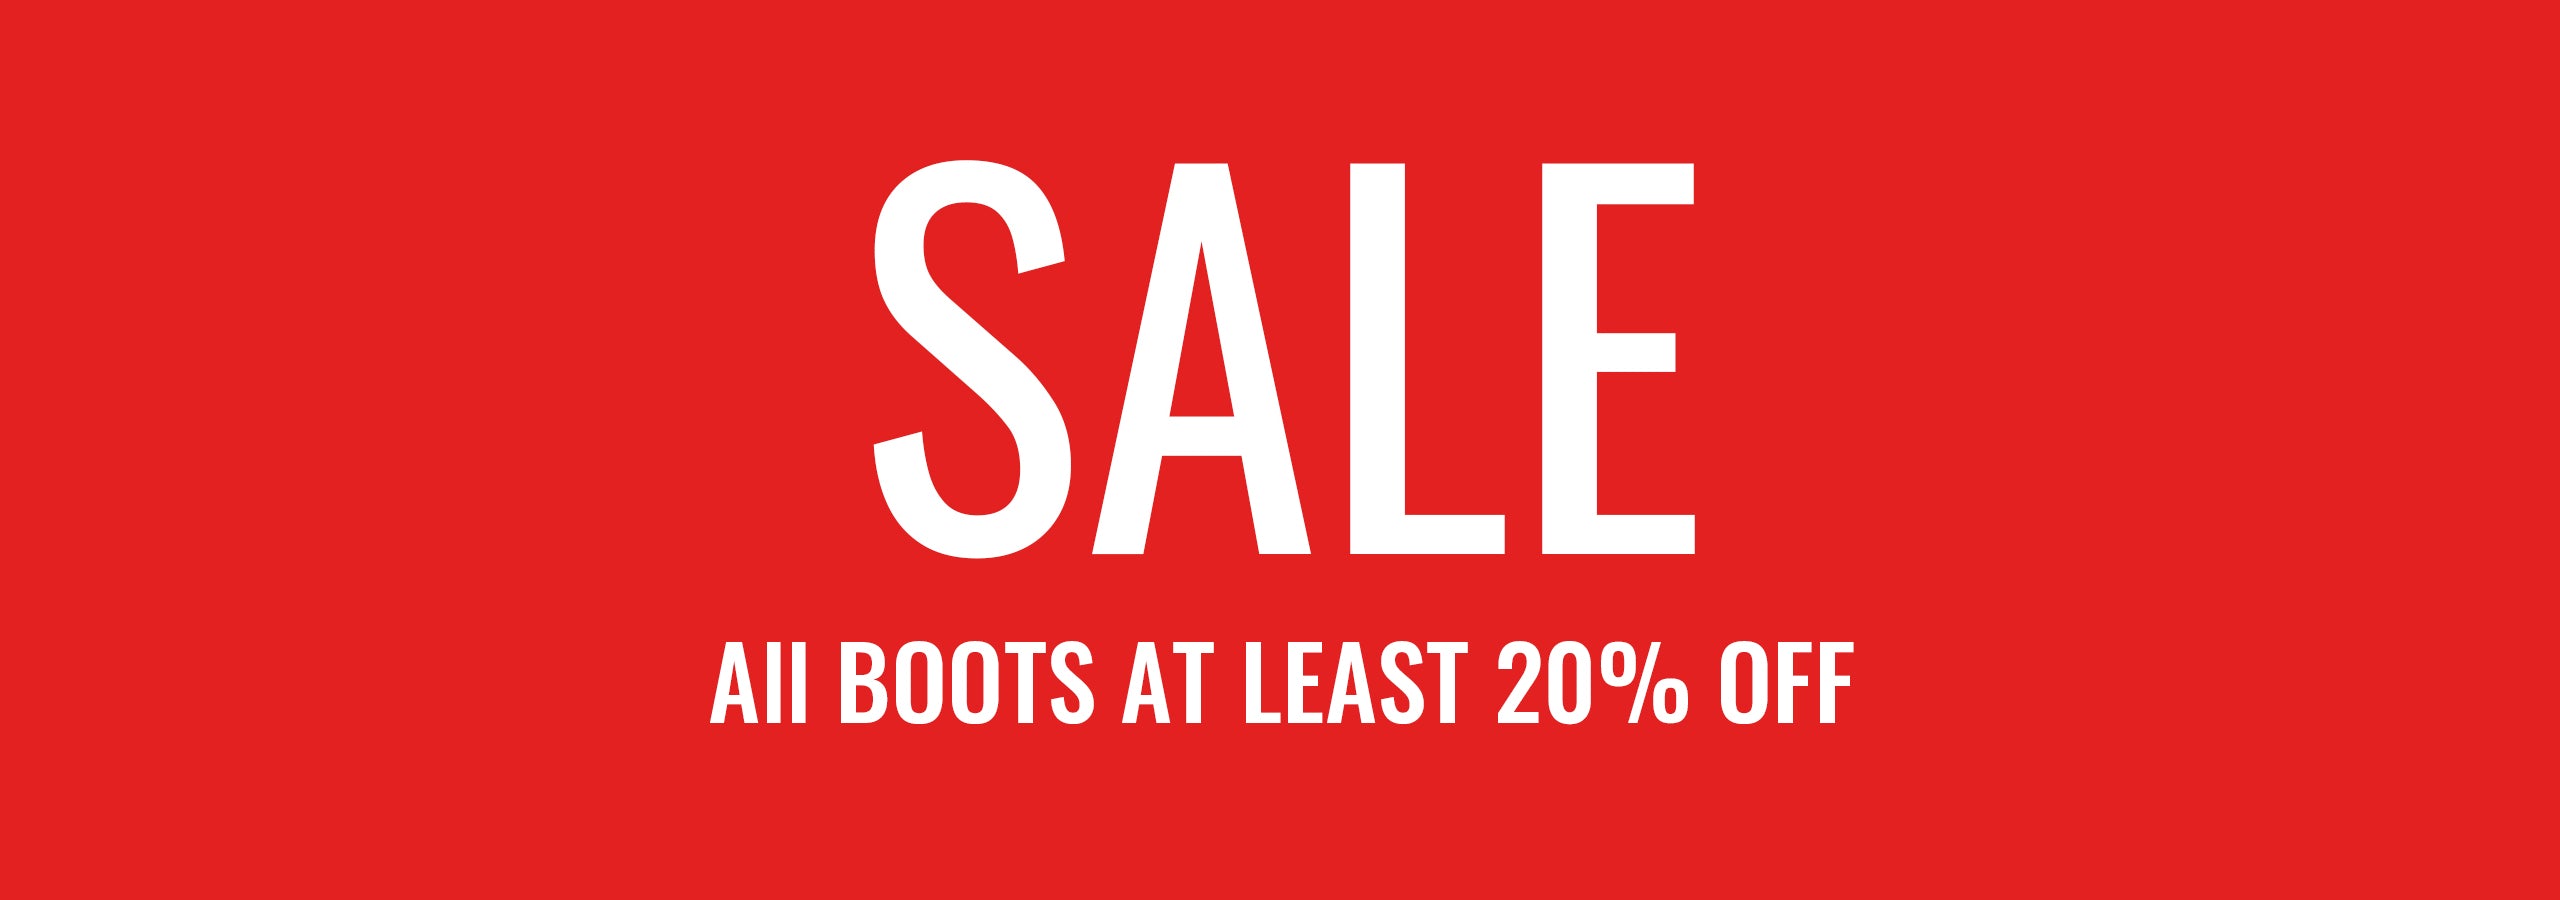 Sale - All Boots at least 20% off